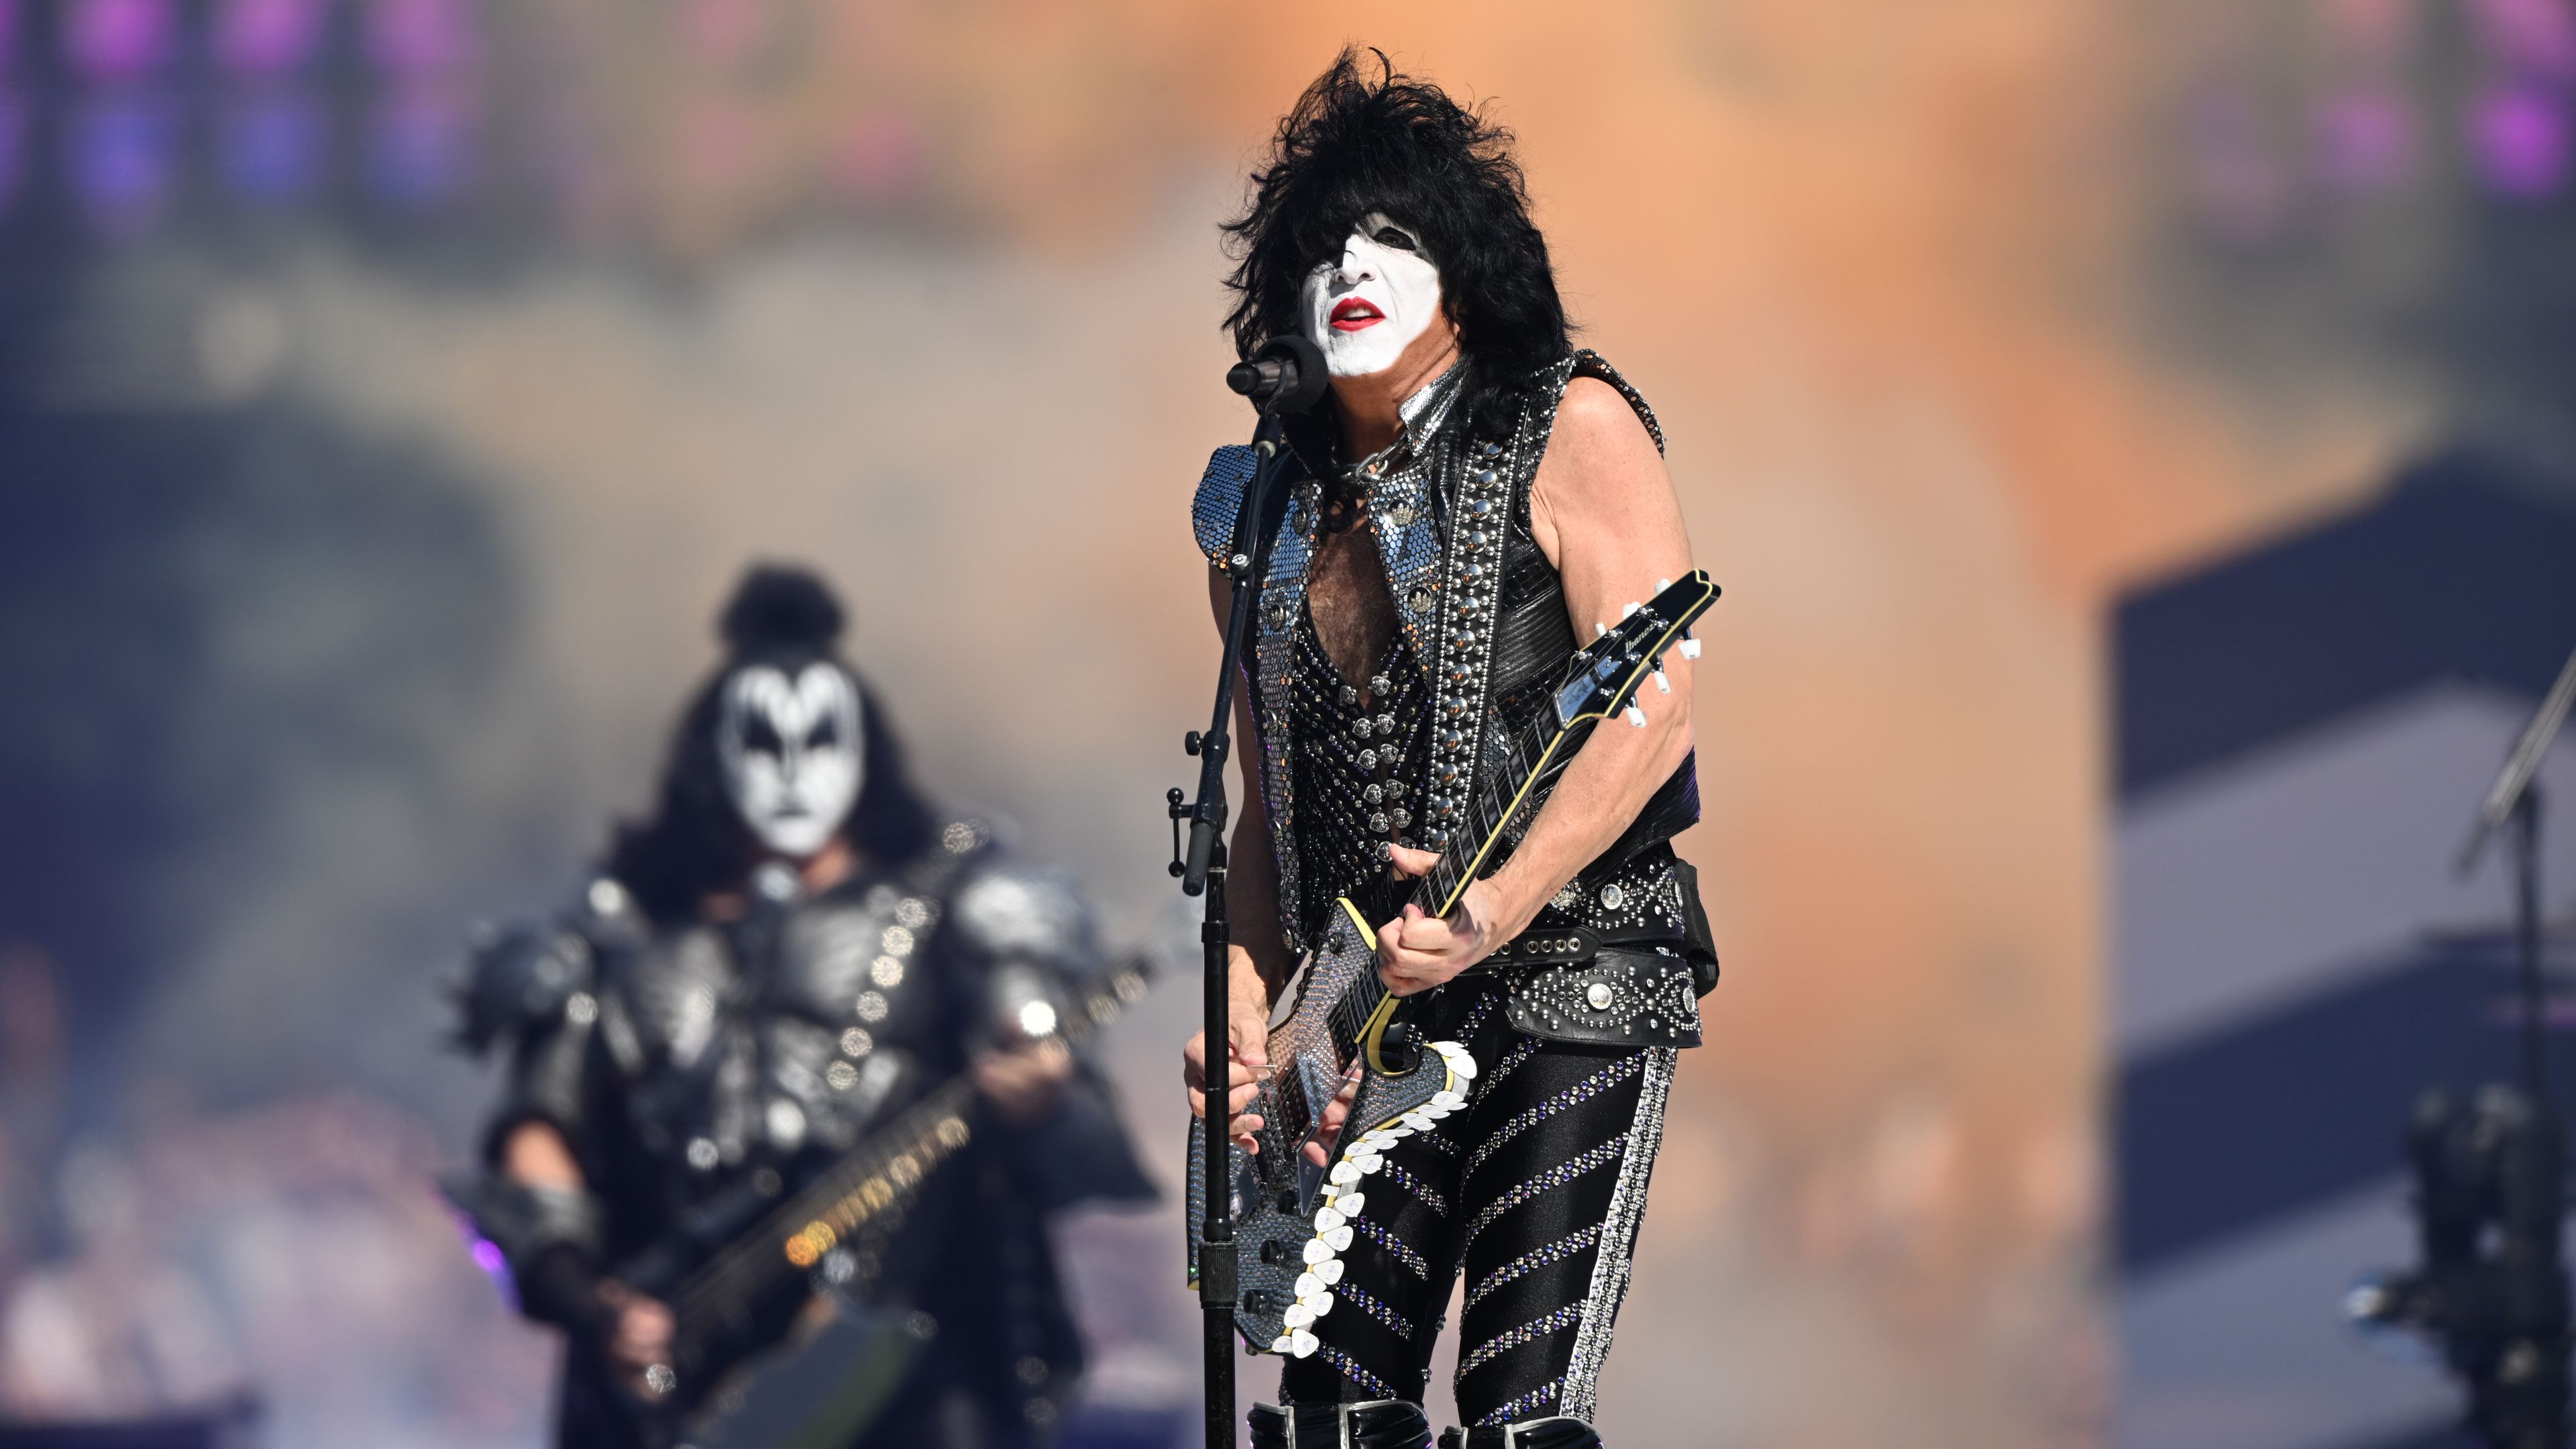 Iconic rock band KISS perform to the MCG before the grand final.